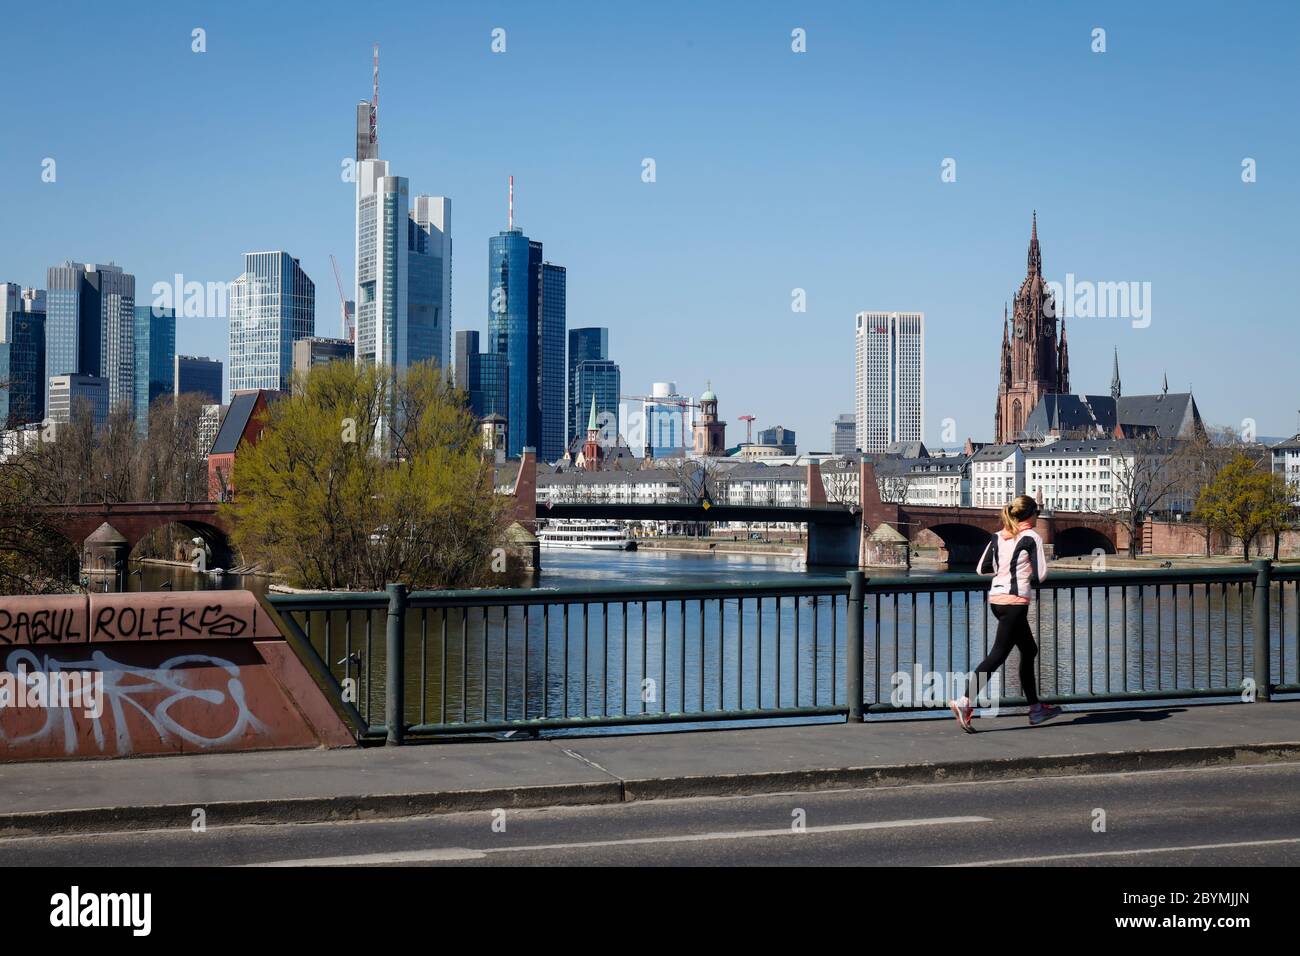 01.04.2020, Frankfurt am Main, Hesse, Germany - Jogger at the time of the Corona crisis with a ban on contact, skyline of downtown Frankfurt in the ba Stock Photo